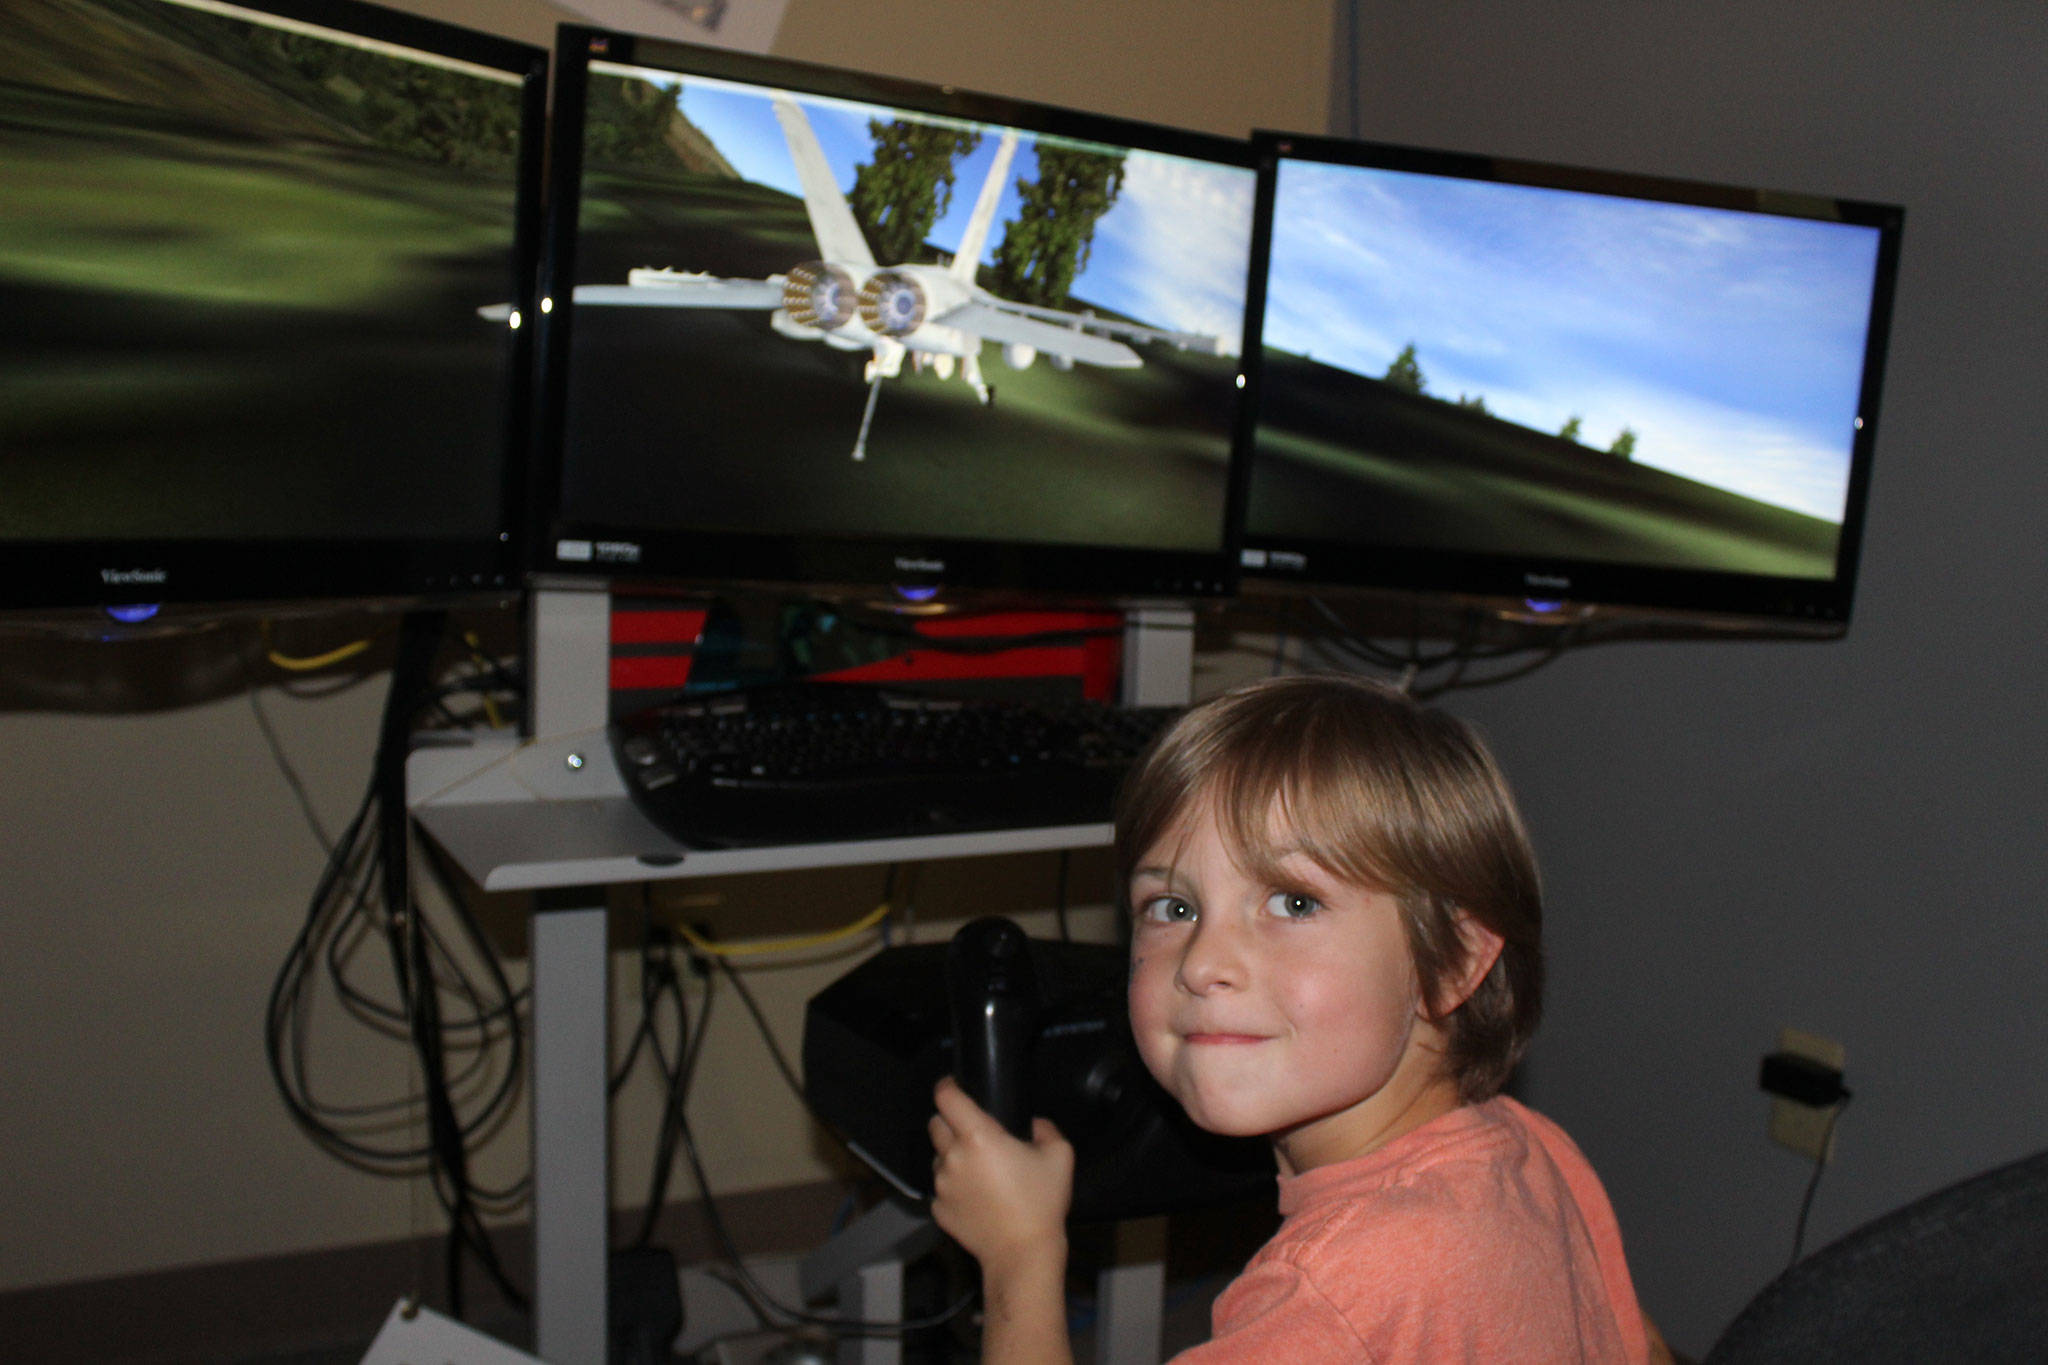 Henry Zovar, 7, takes off with a flight simulator that’s popular with kids inside the PBY Naval Air Museum. Zovar’s grandfather was a pilot at Naval Air Station Whidbey Island. His family visited on Veteran’s Day.